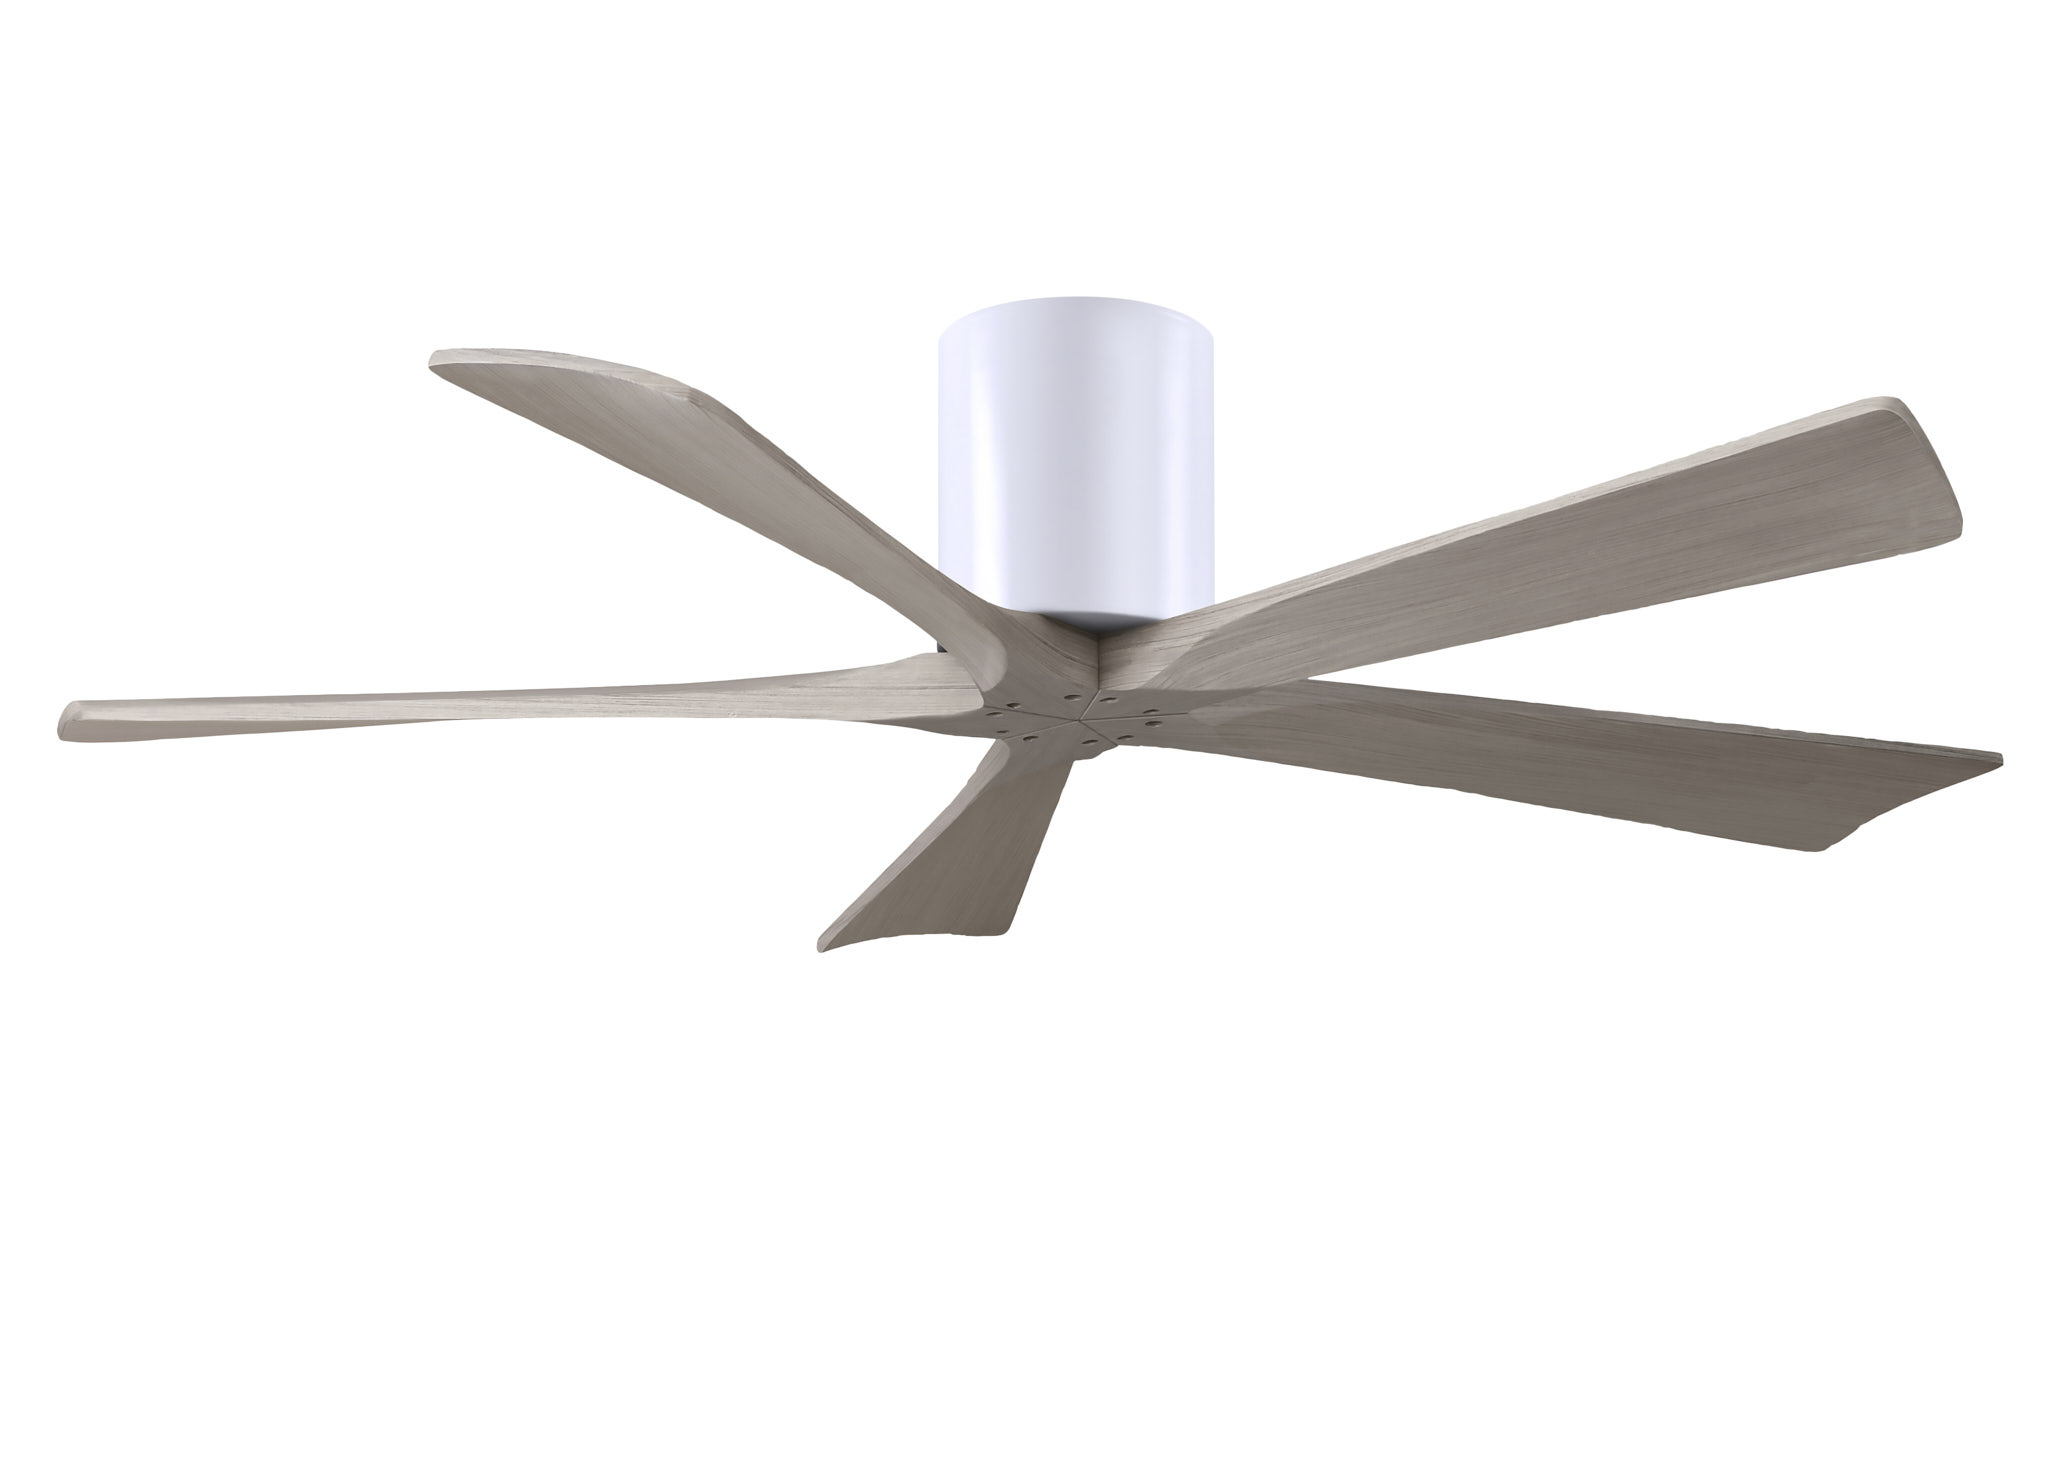 Irene-5H 6-speed ceiling fan in gloss white finish with 52